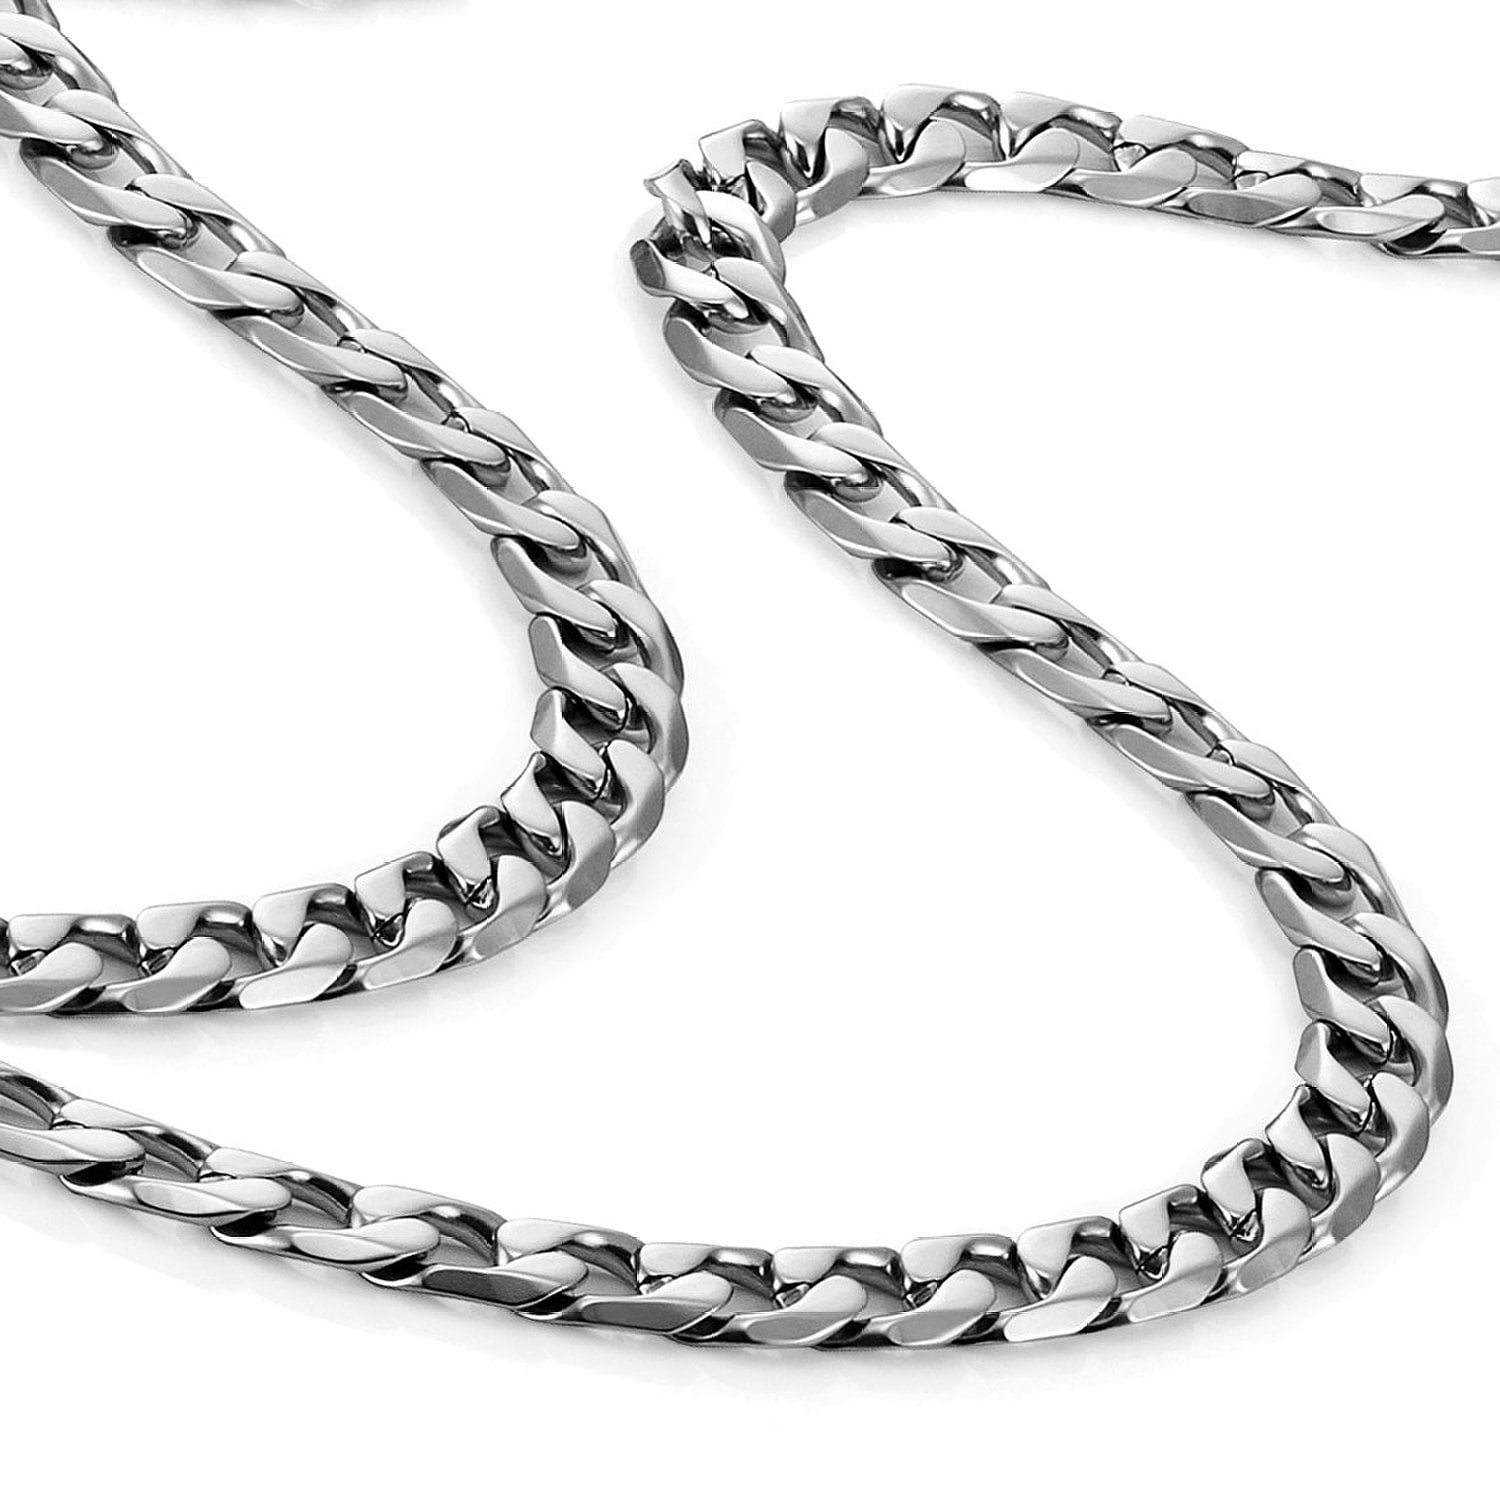 Urban Jewelry - Classic Mens Necklace 316L Stainless Steel Silver Chain Men's Stainless Steel Necklace